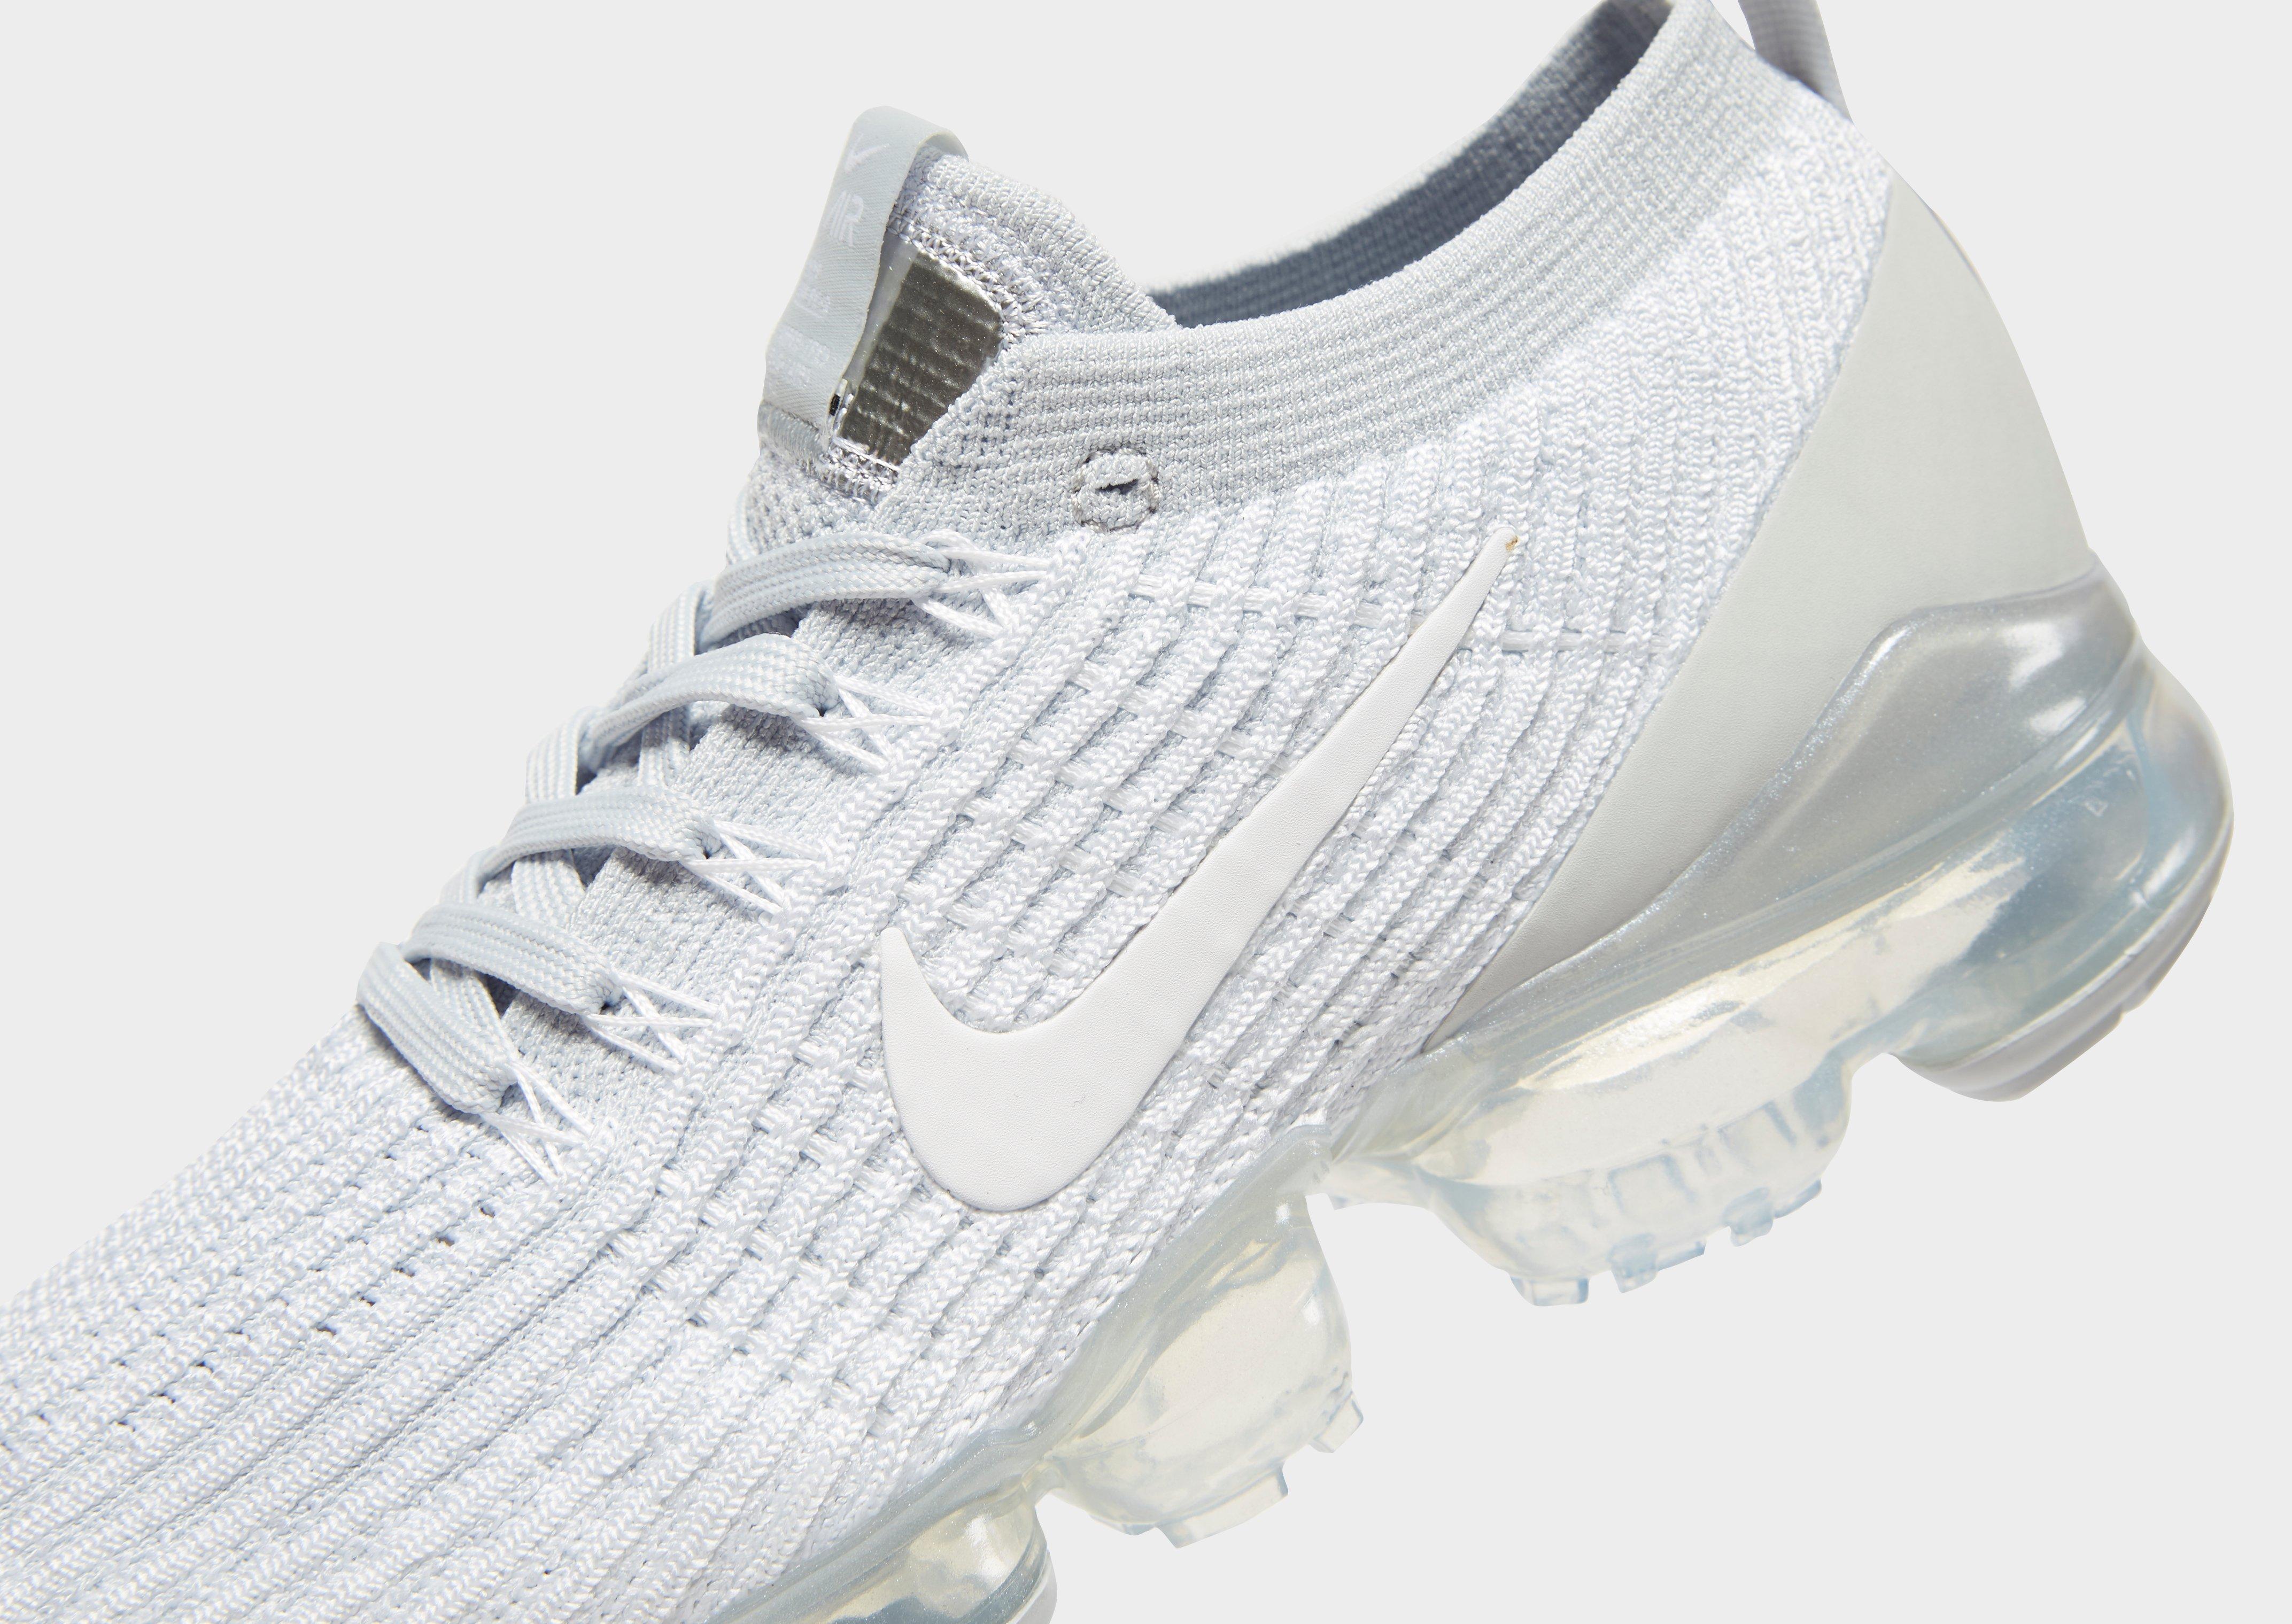 nike air vapormax 3 flyknit trainers in triple white